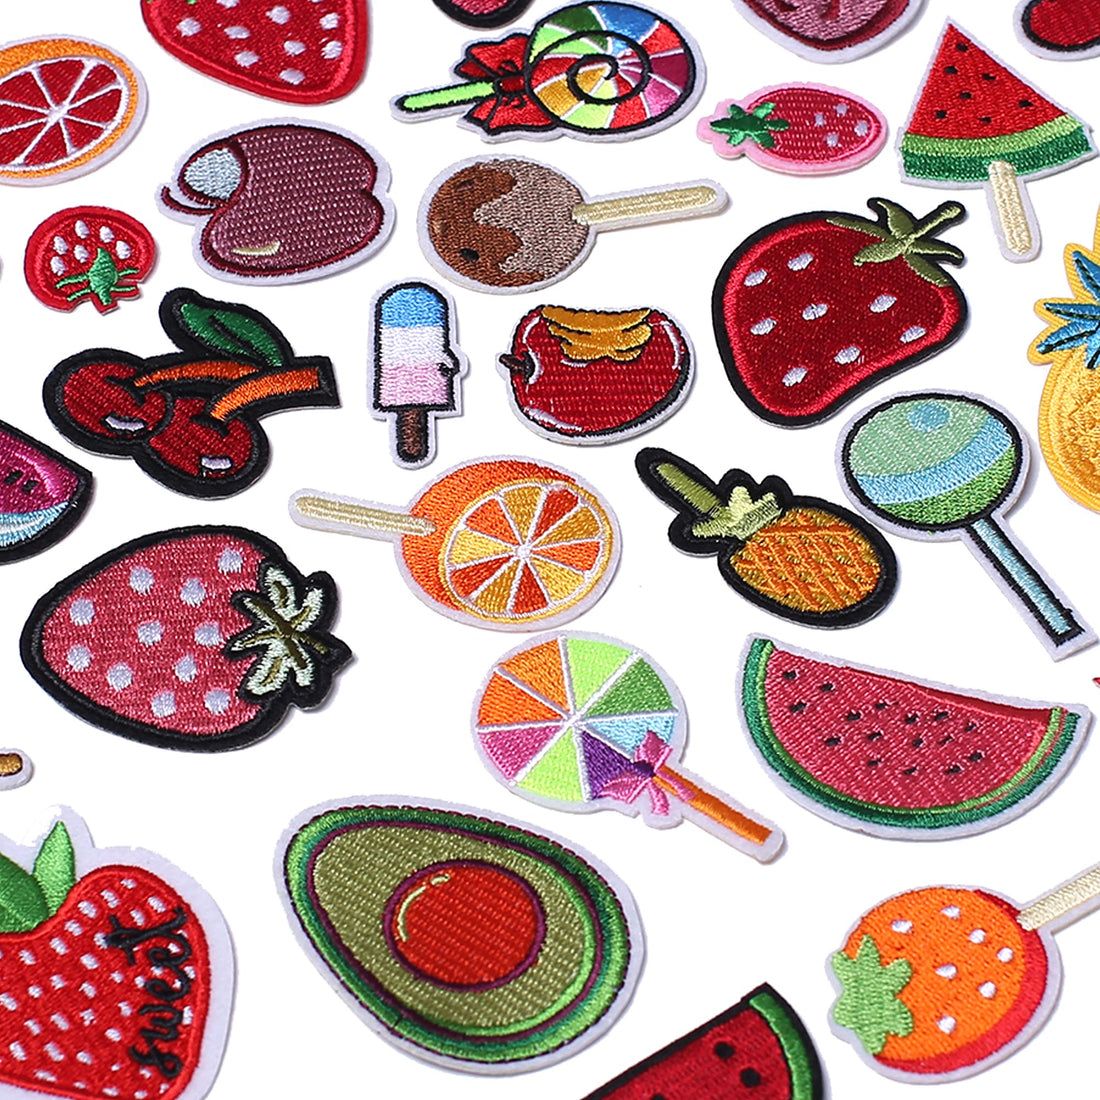 Set of 40 pcs Fruit Embroidered Iron on Patch for Clothes, Iron-on Patches / Sew-on Appliques Patches for Clothing, Jackets, Backpacks, Caps, Jeans